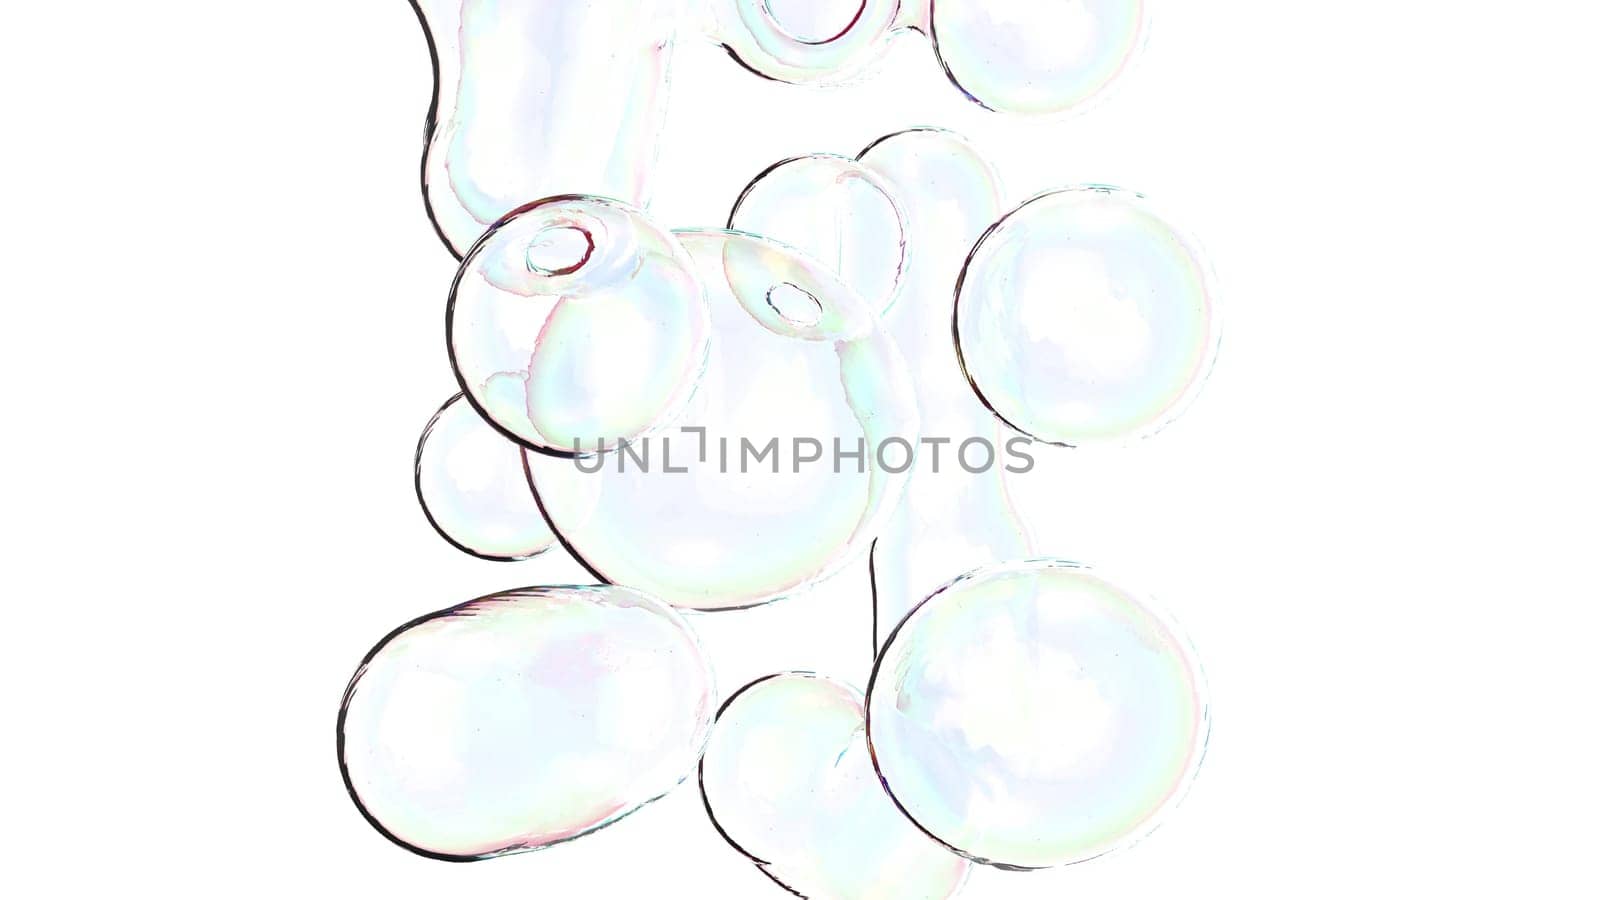 Transparent soap bubbles metaballs on white back 3d render by Zozulinskyi